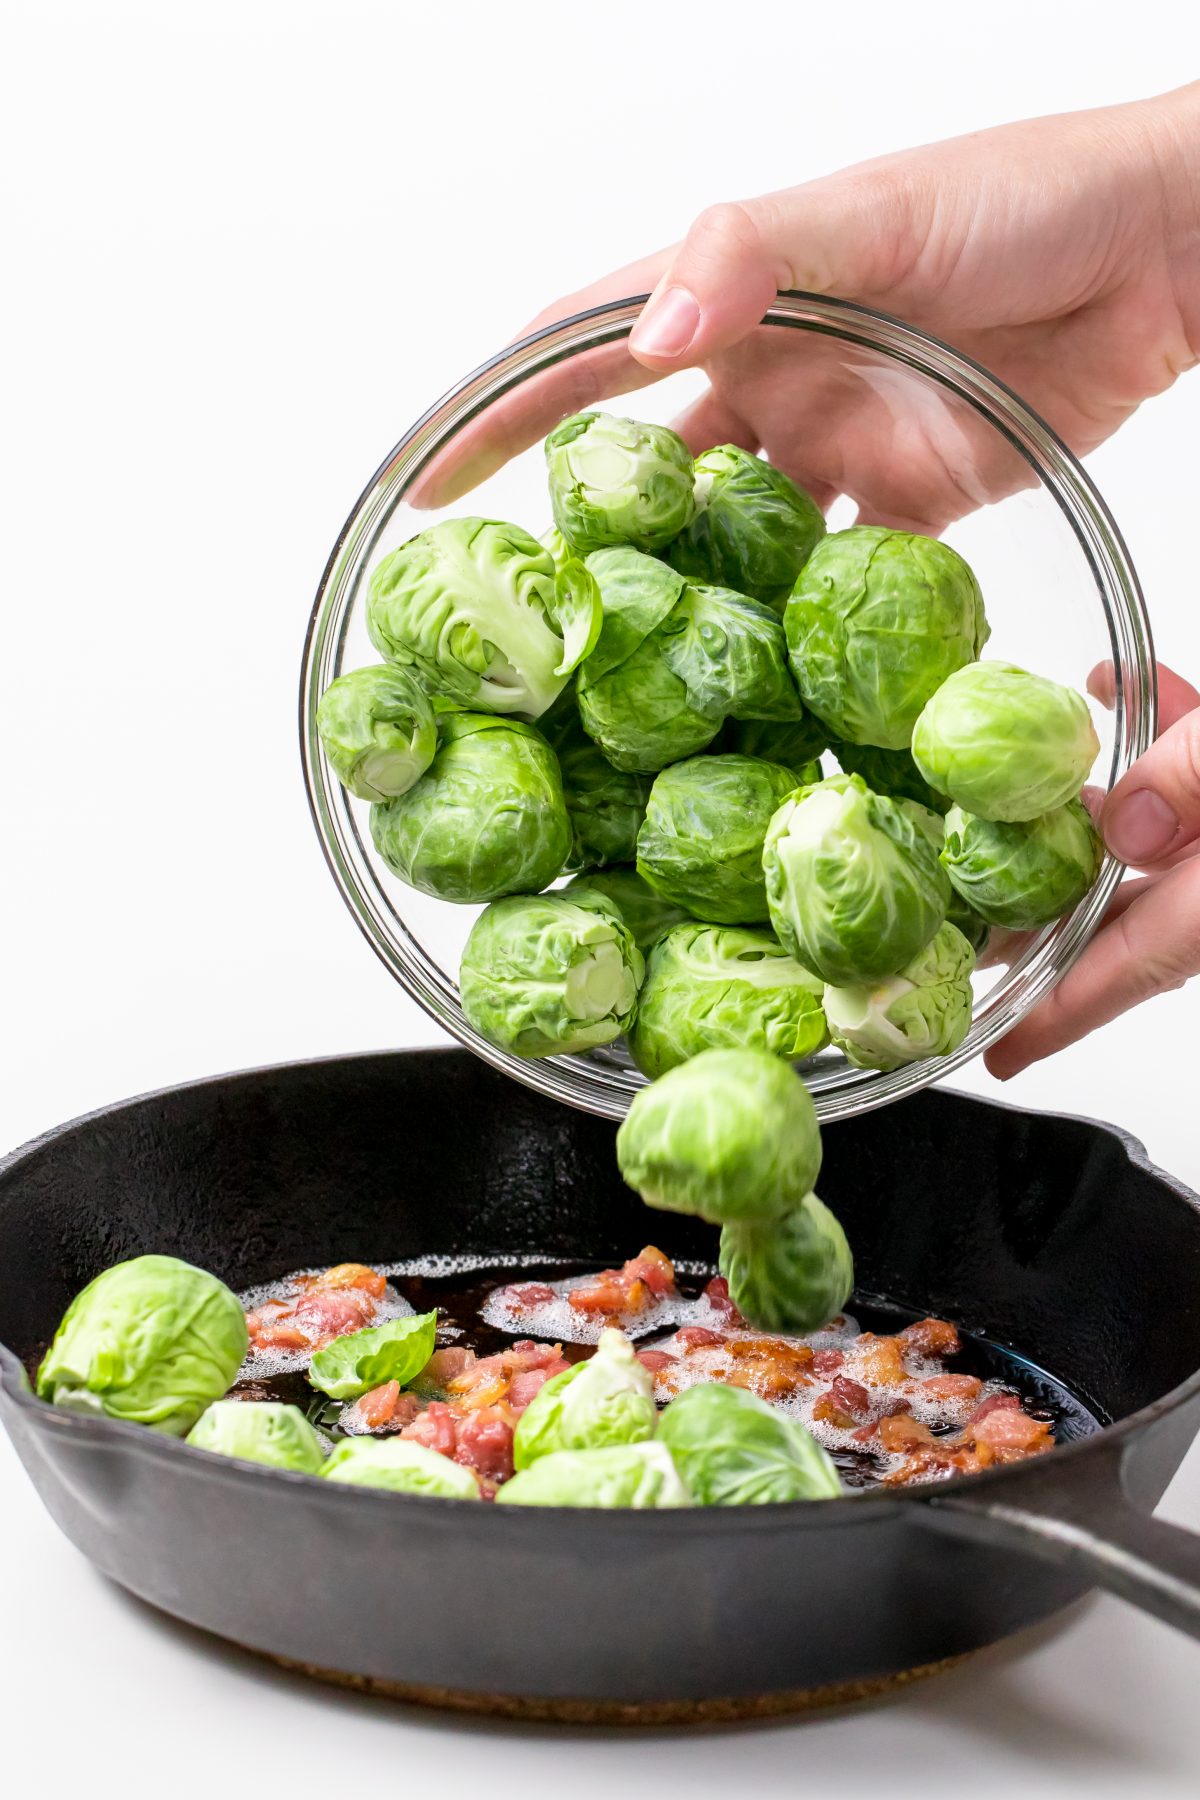 Add 1 pound of brussels sprouts to cooked bacon